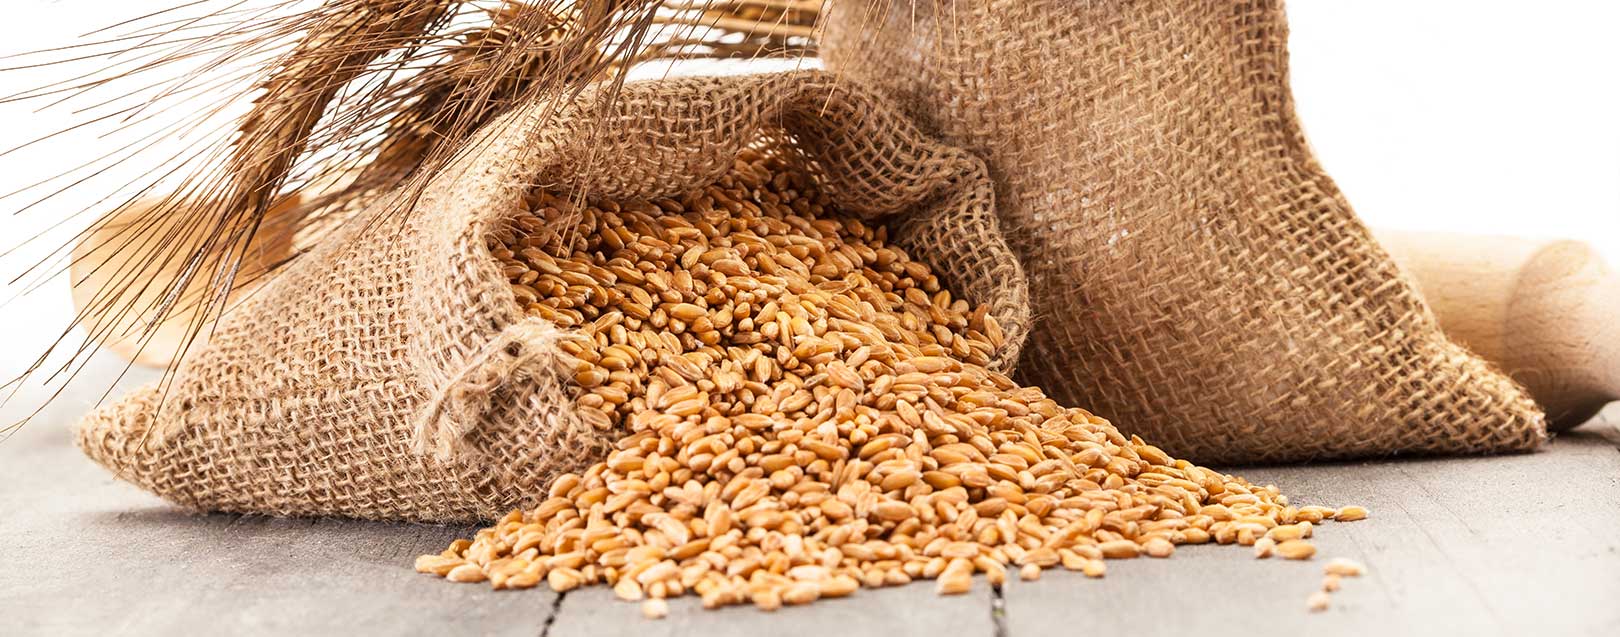 Wheat sowing rises 7%, pulse acreage up 11% this Rabi season